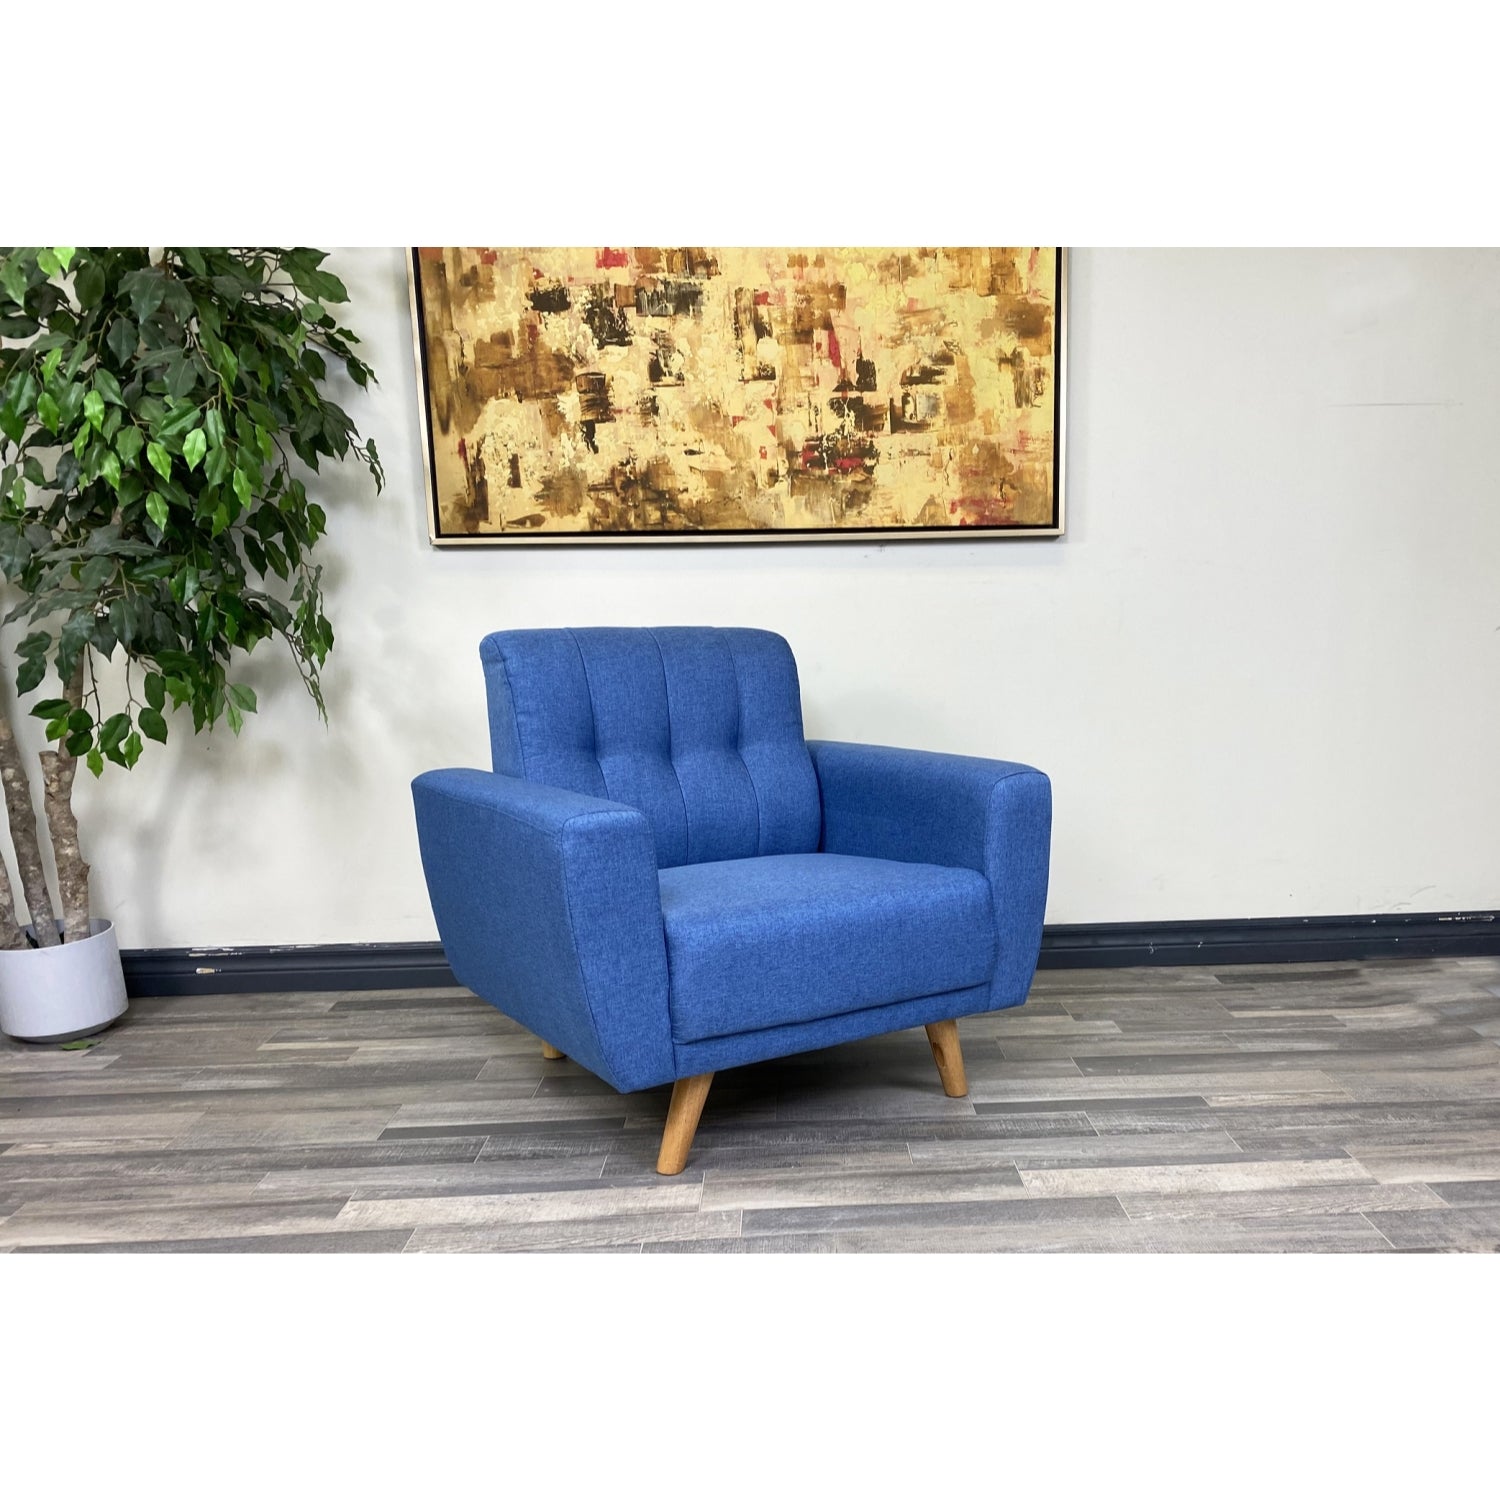 ViscoLogic MOCA Contemporary New Mid-Century Tufted Style Fabric Upholstered Modern Living Room Sofa (Blue)